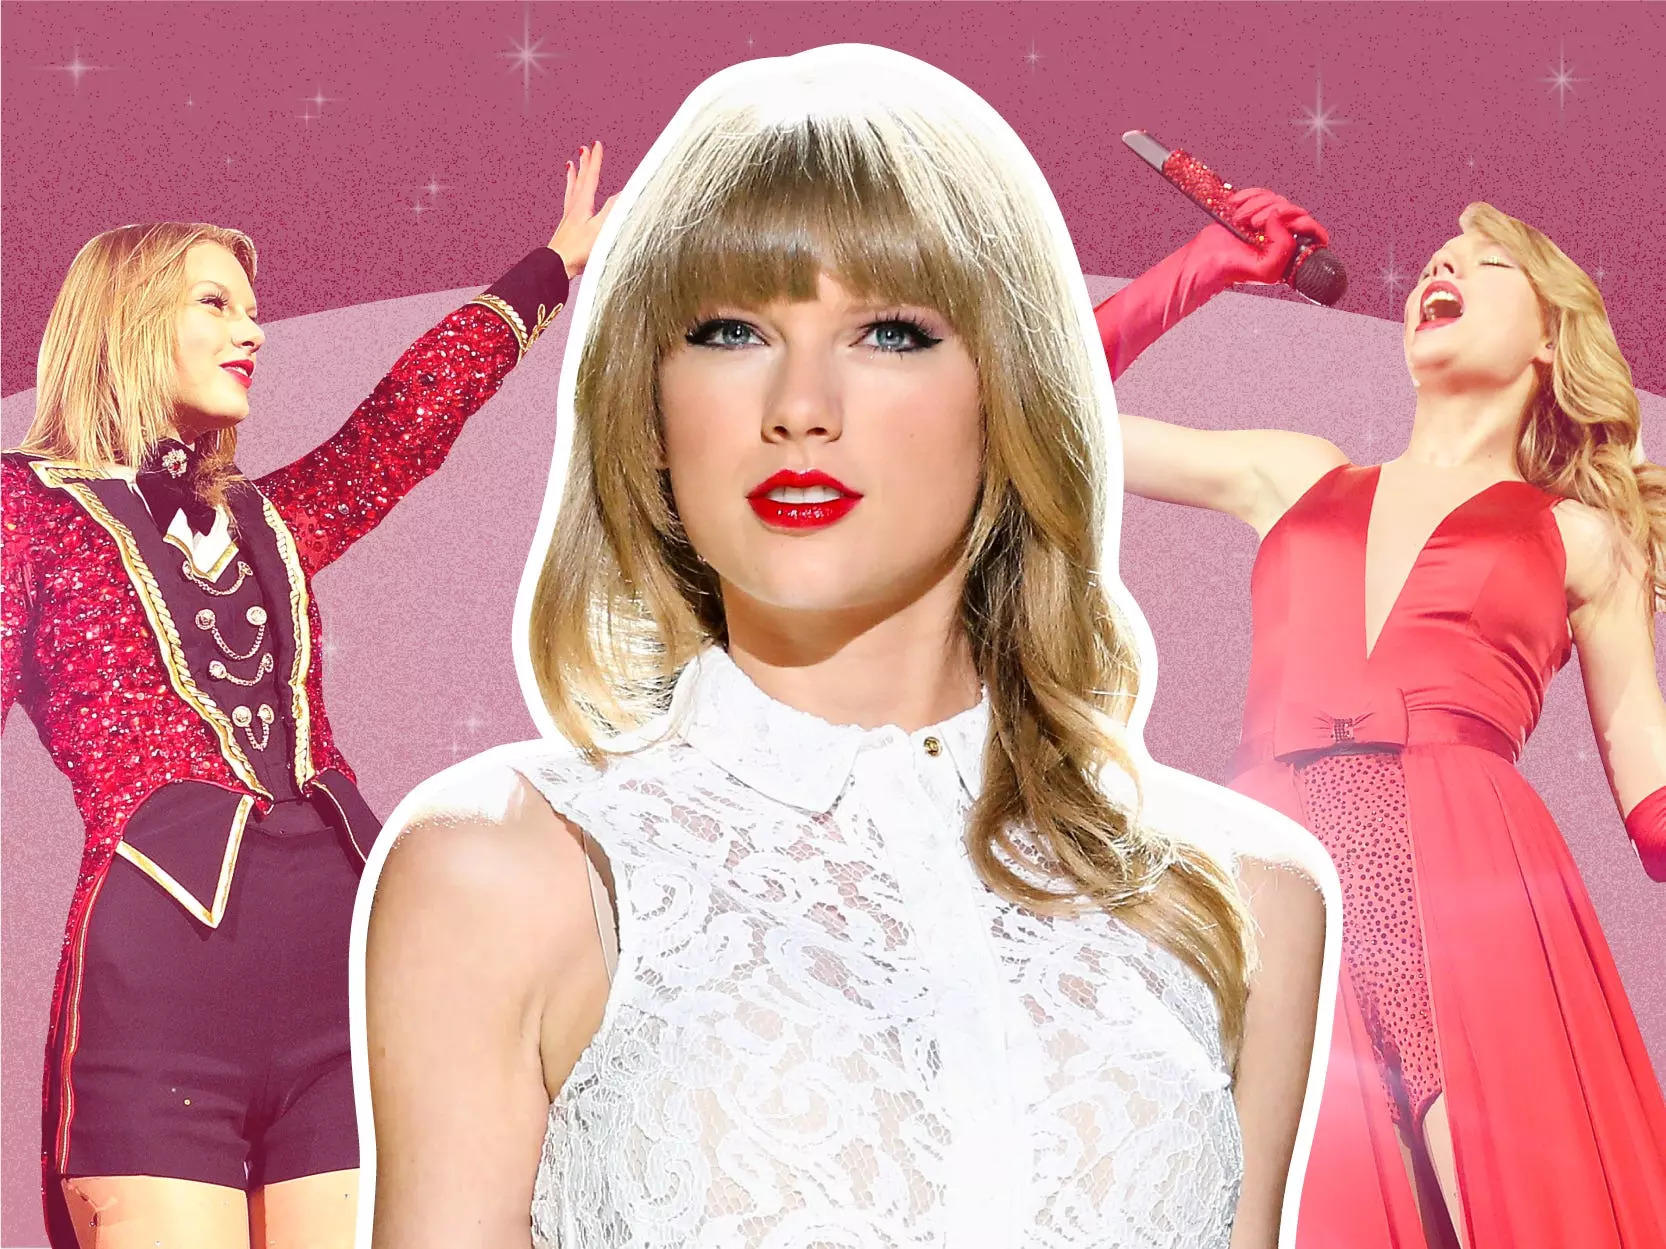 Taylor Swift S Rerecorded Red Album Broke 2 Spotify Records In 1 Day — Here S Why It S A Big